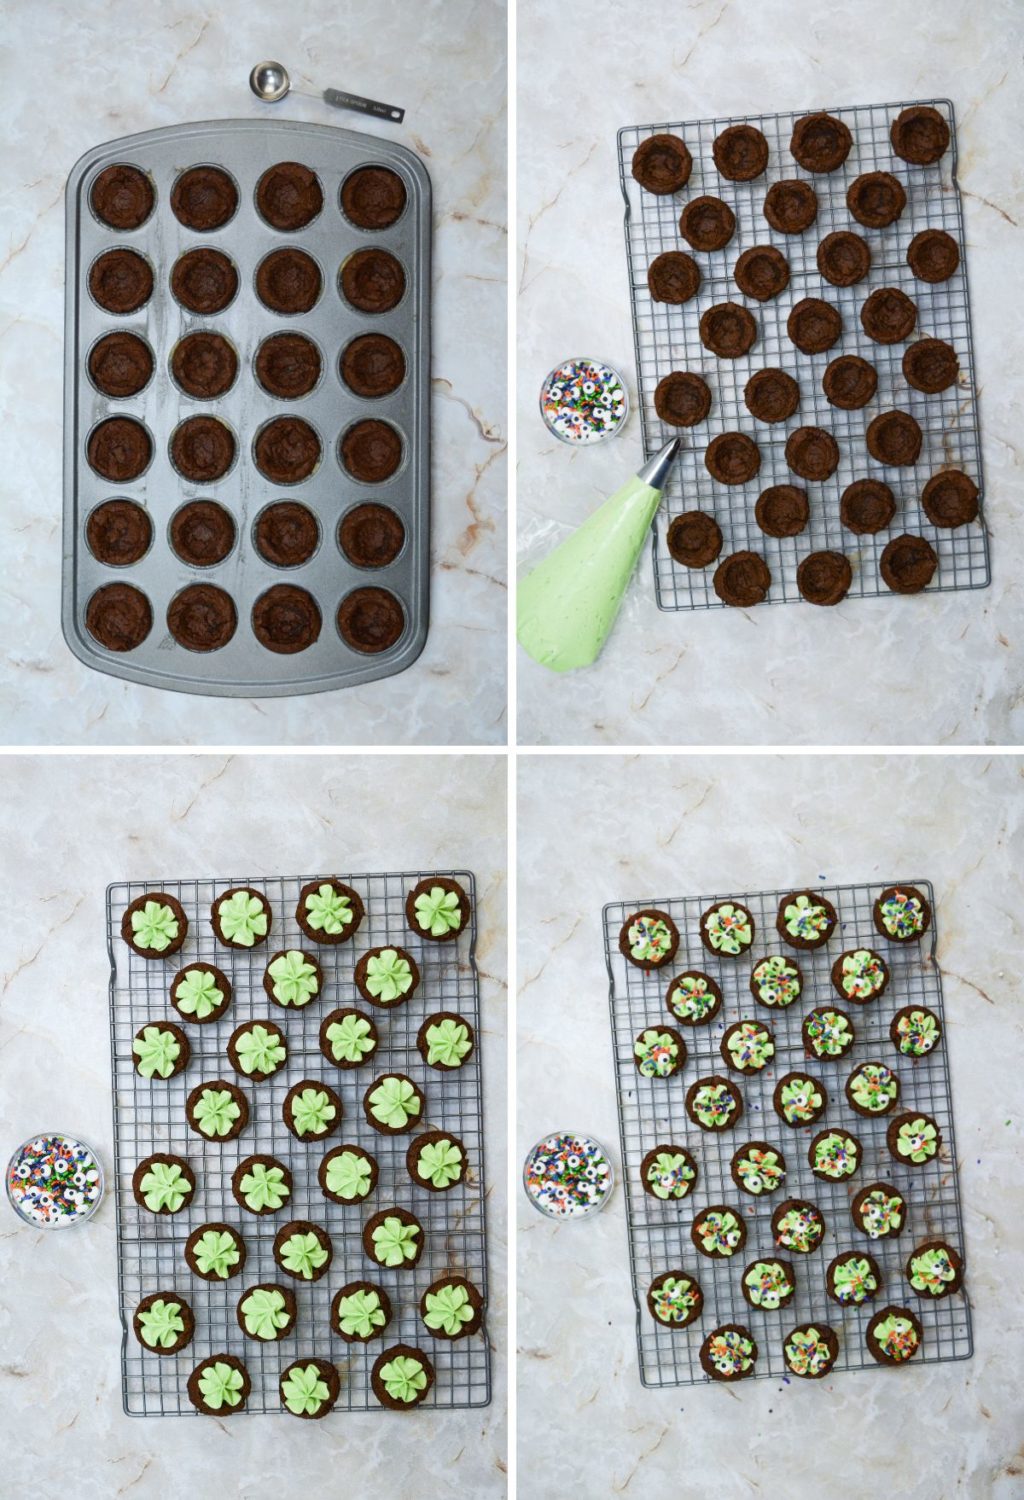 Four pictures showing how to make chocolate cupcakes.